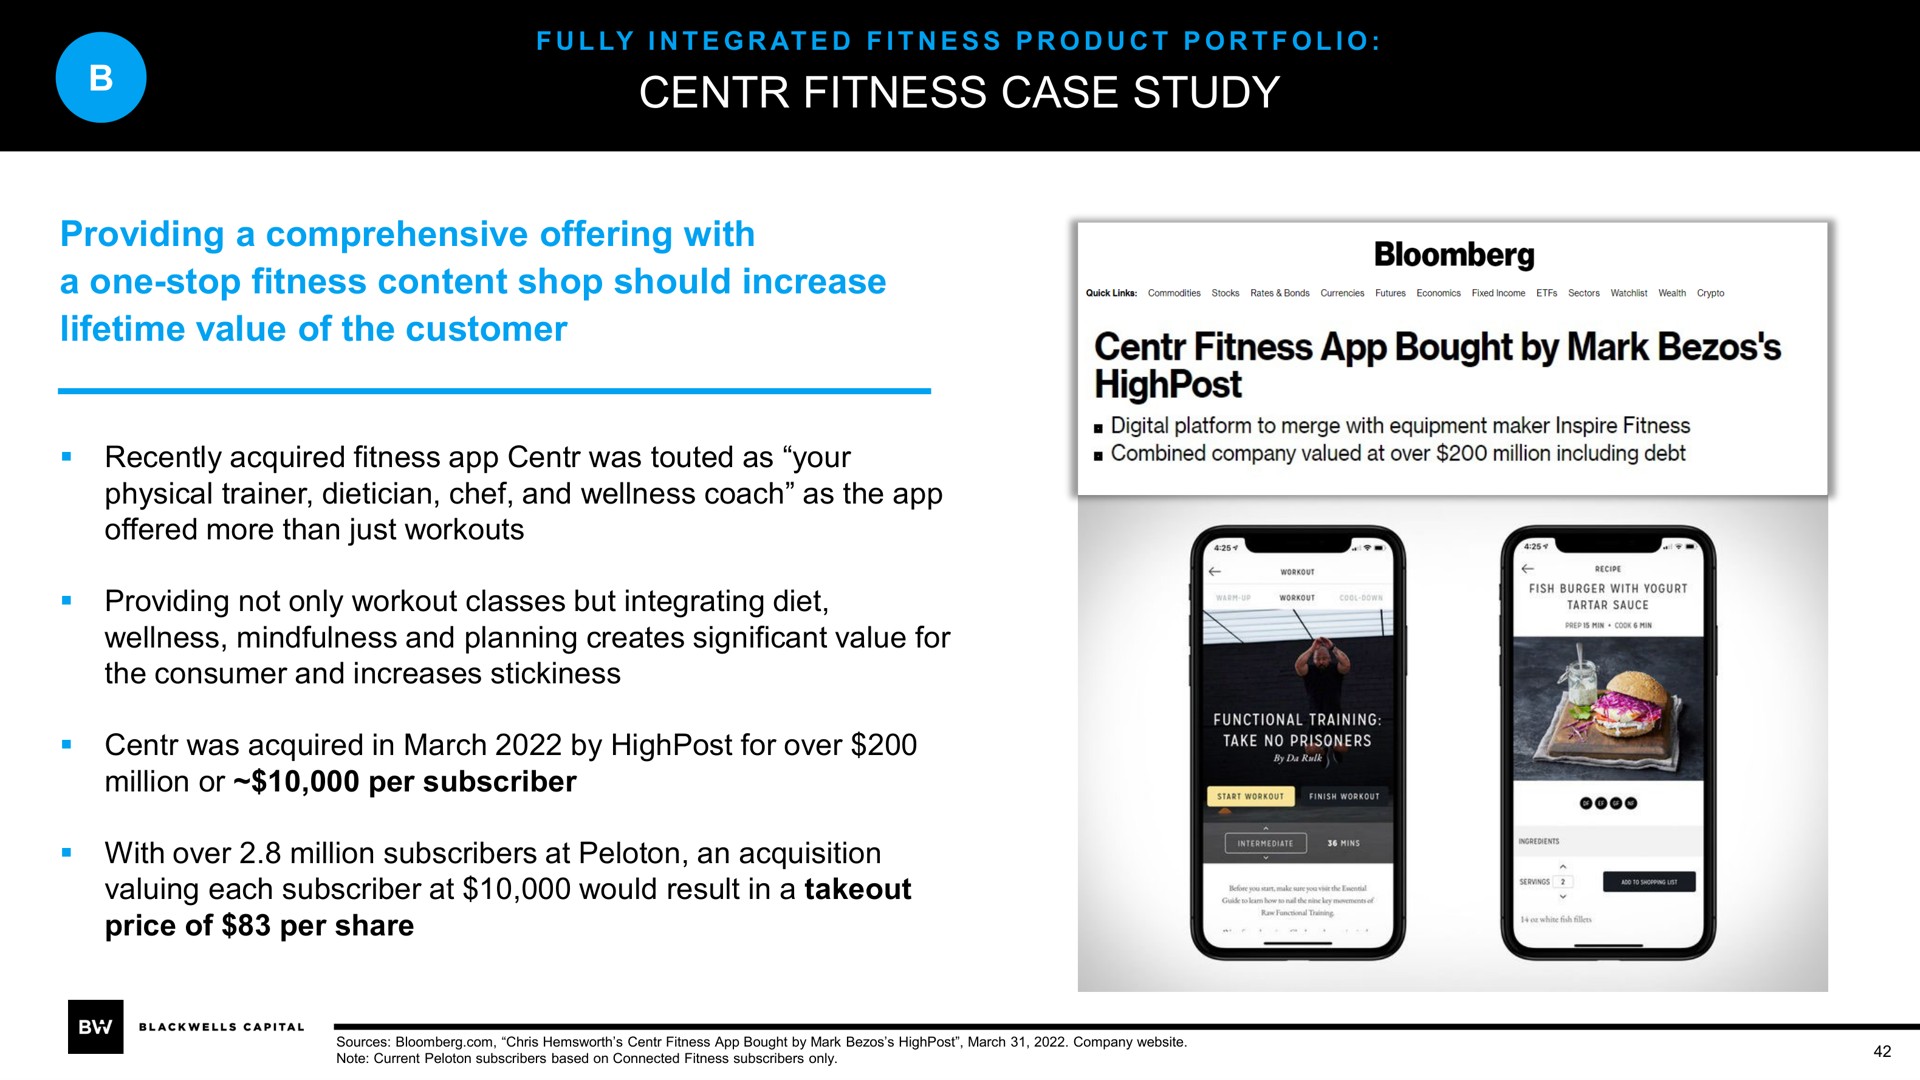 fitness case study providing a comprehensive offering with a one stop fitness content shop should increase lifetime value of the customer | Blackwells Capital